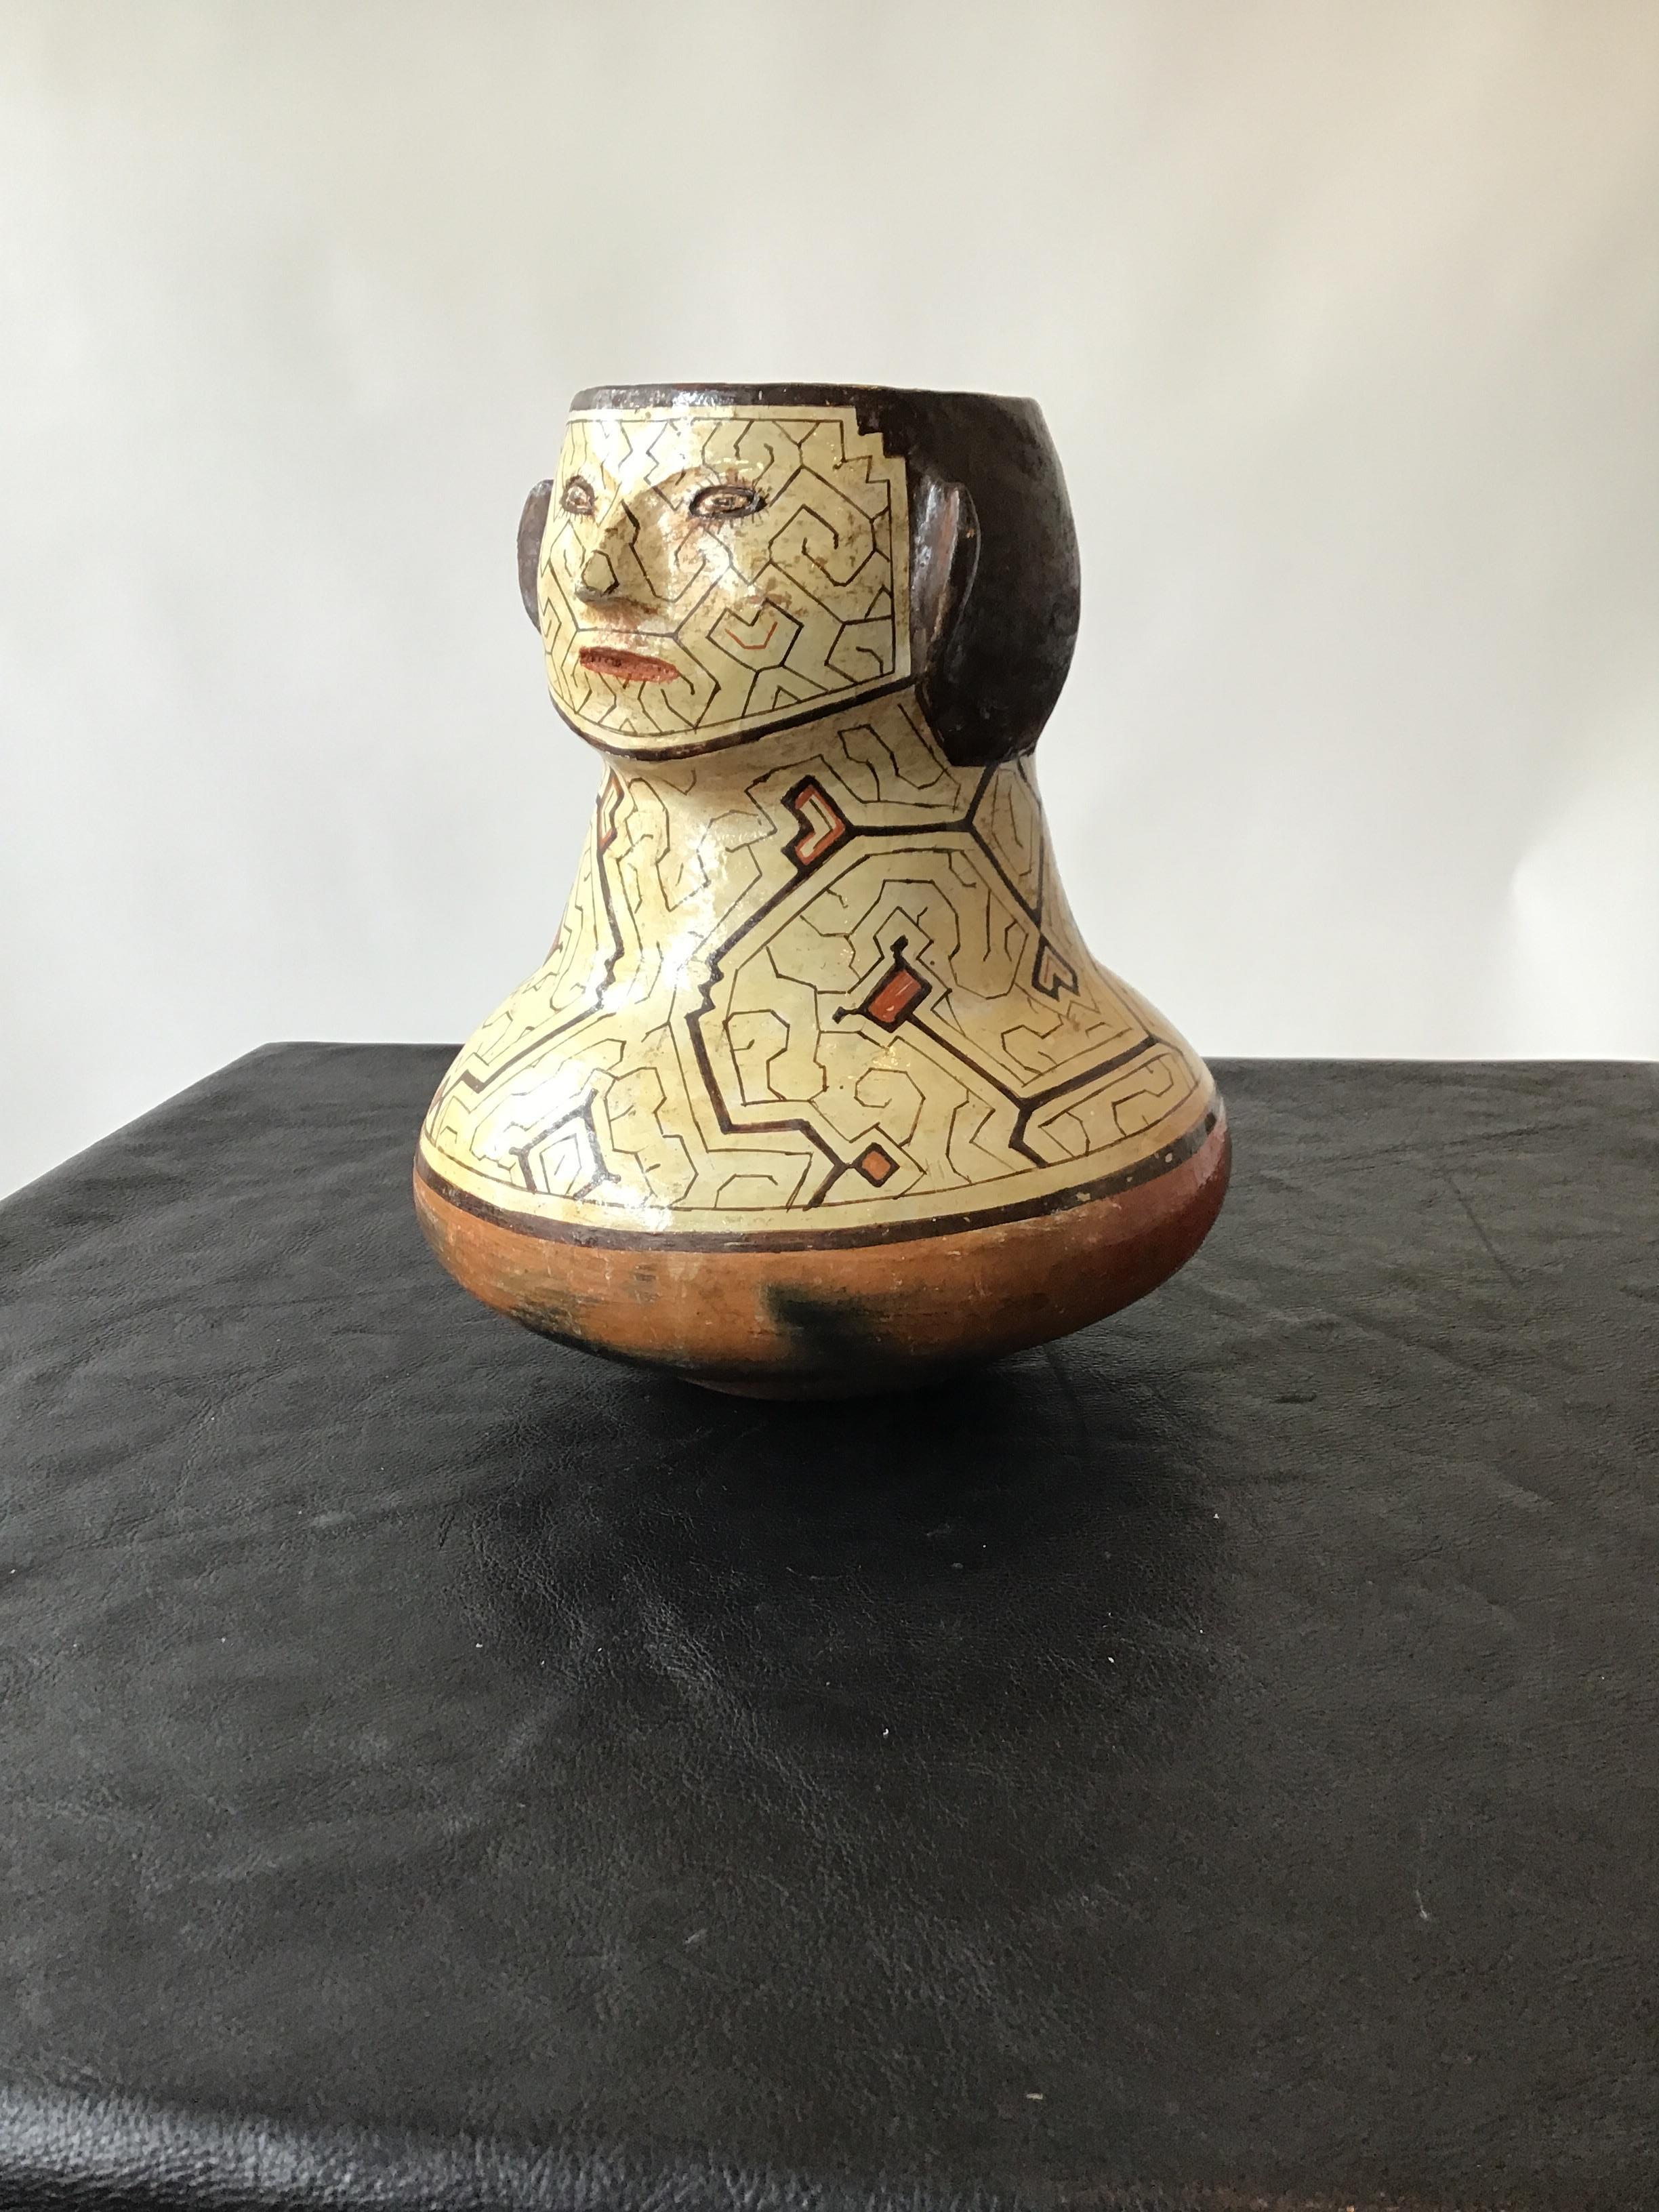 Shipibo Peruvian Clay Face Vase In Good Condition For Sale In Tarrytown, NY